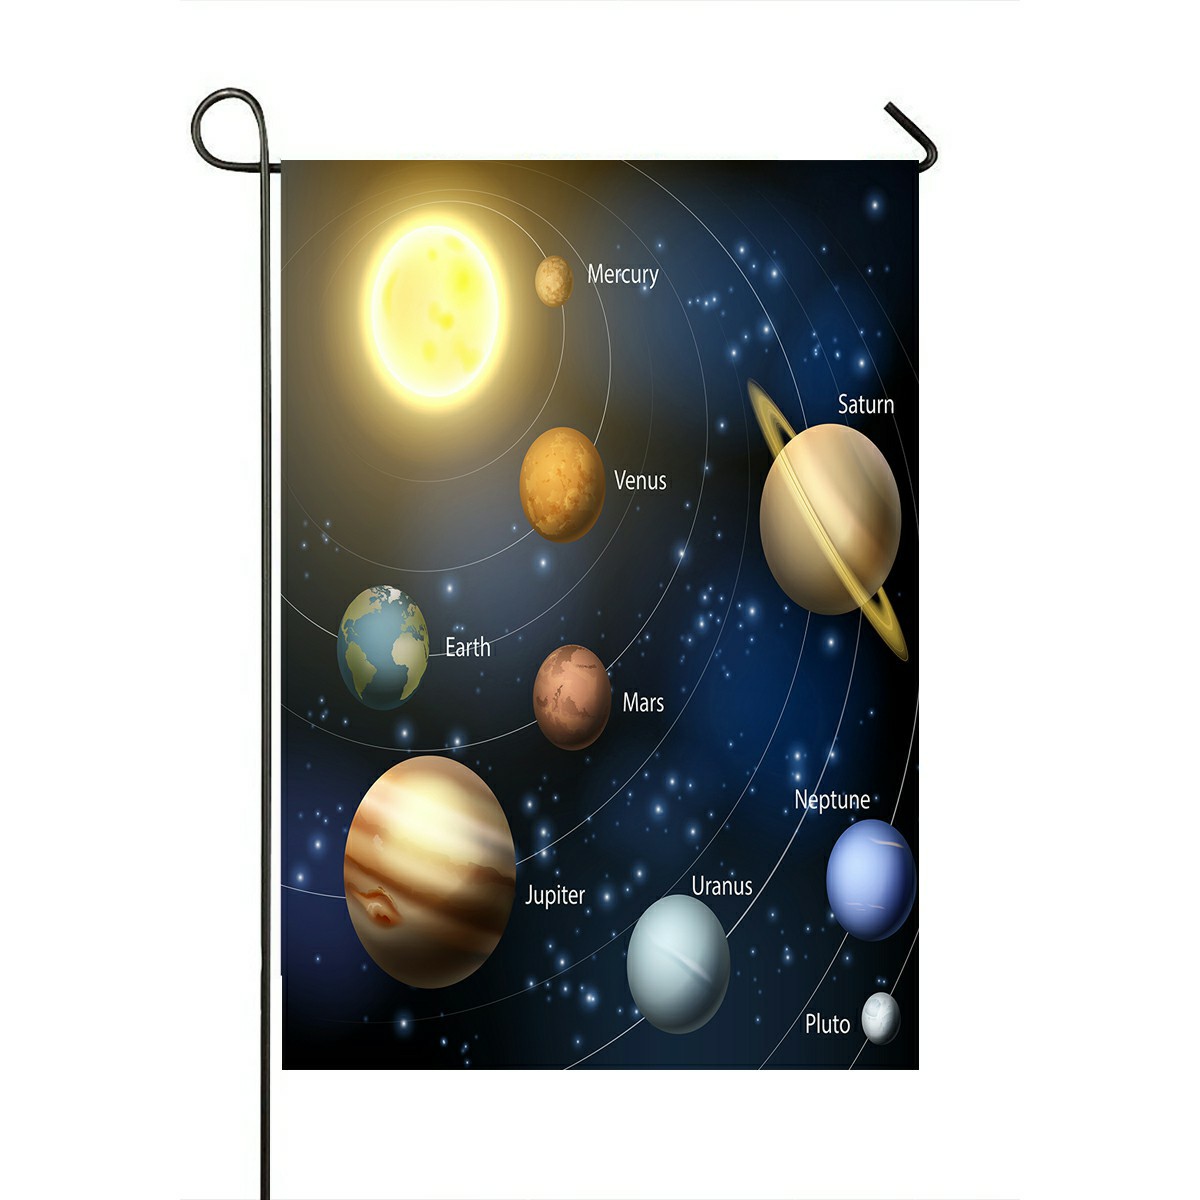 ECZJNT An planets our solar system text name labels Outdoor Flag Home Party Garden Decor 28x40 Inch - image 1 of 1